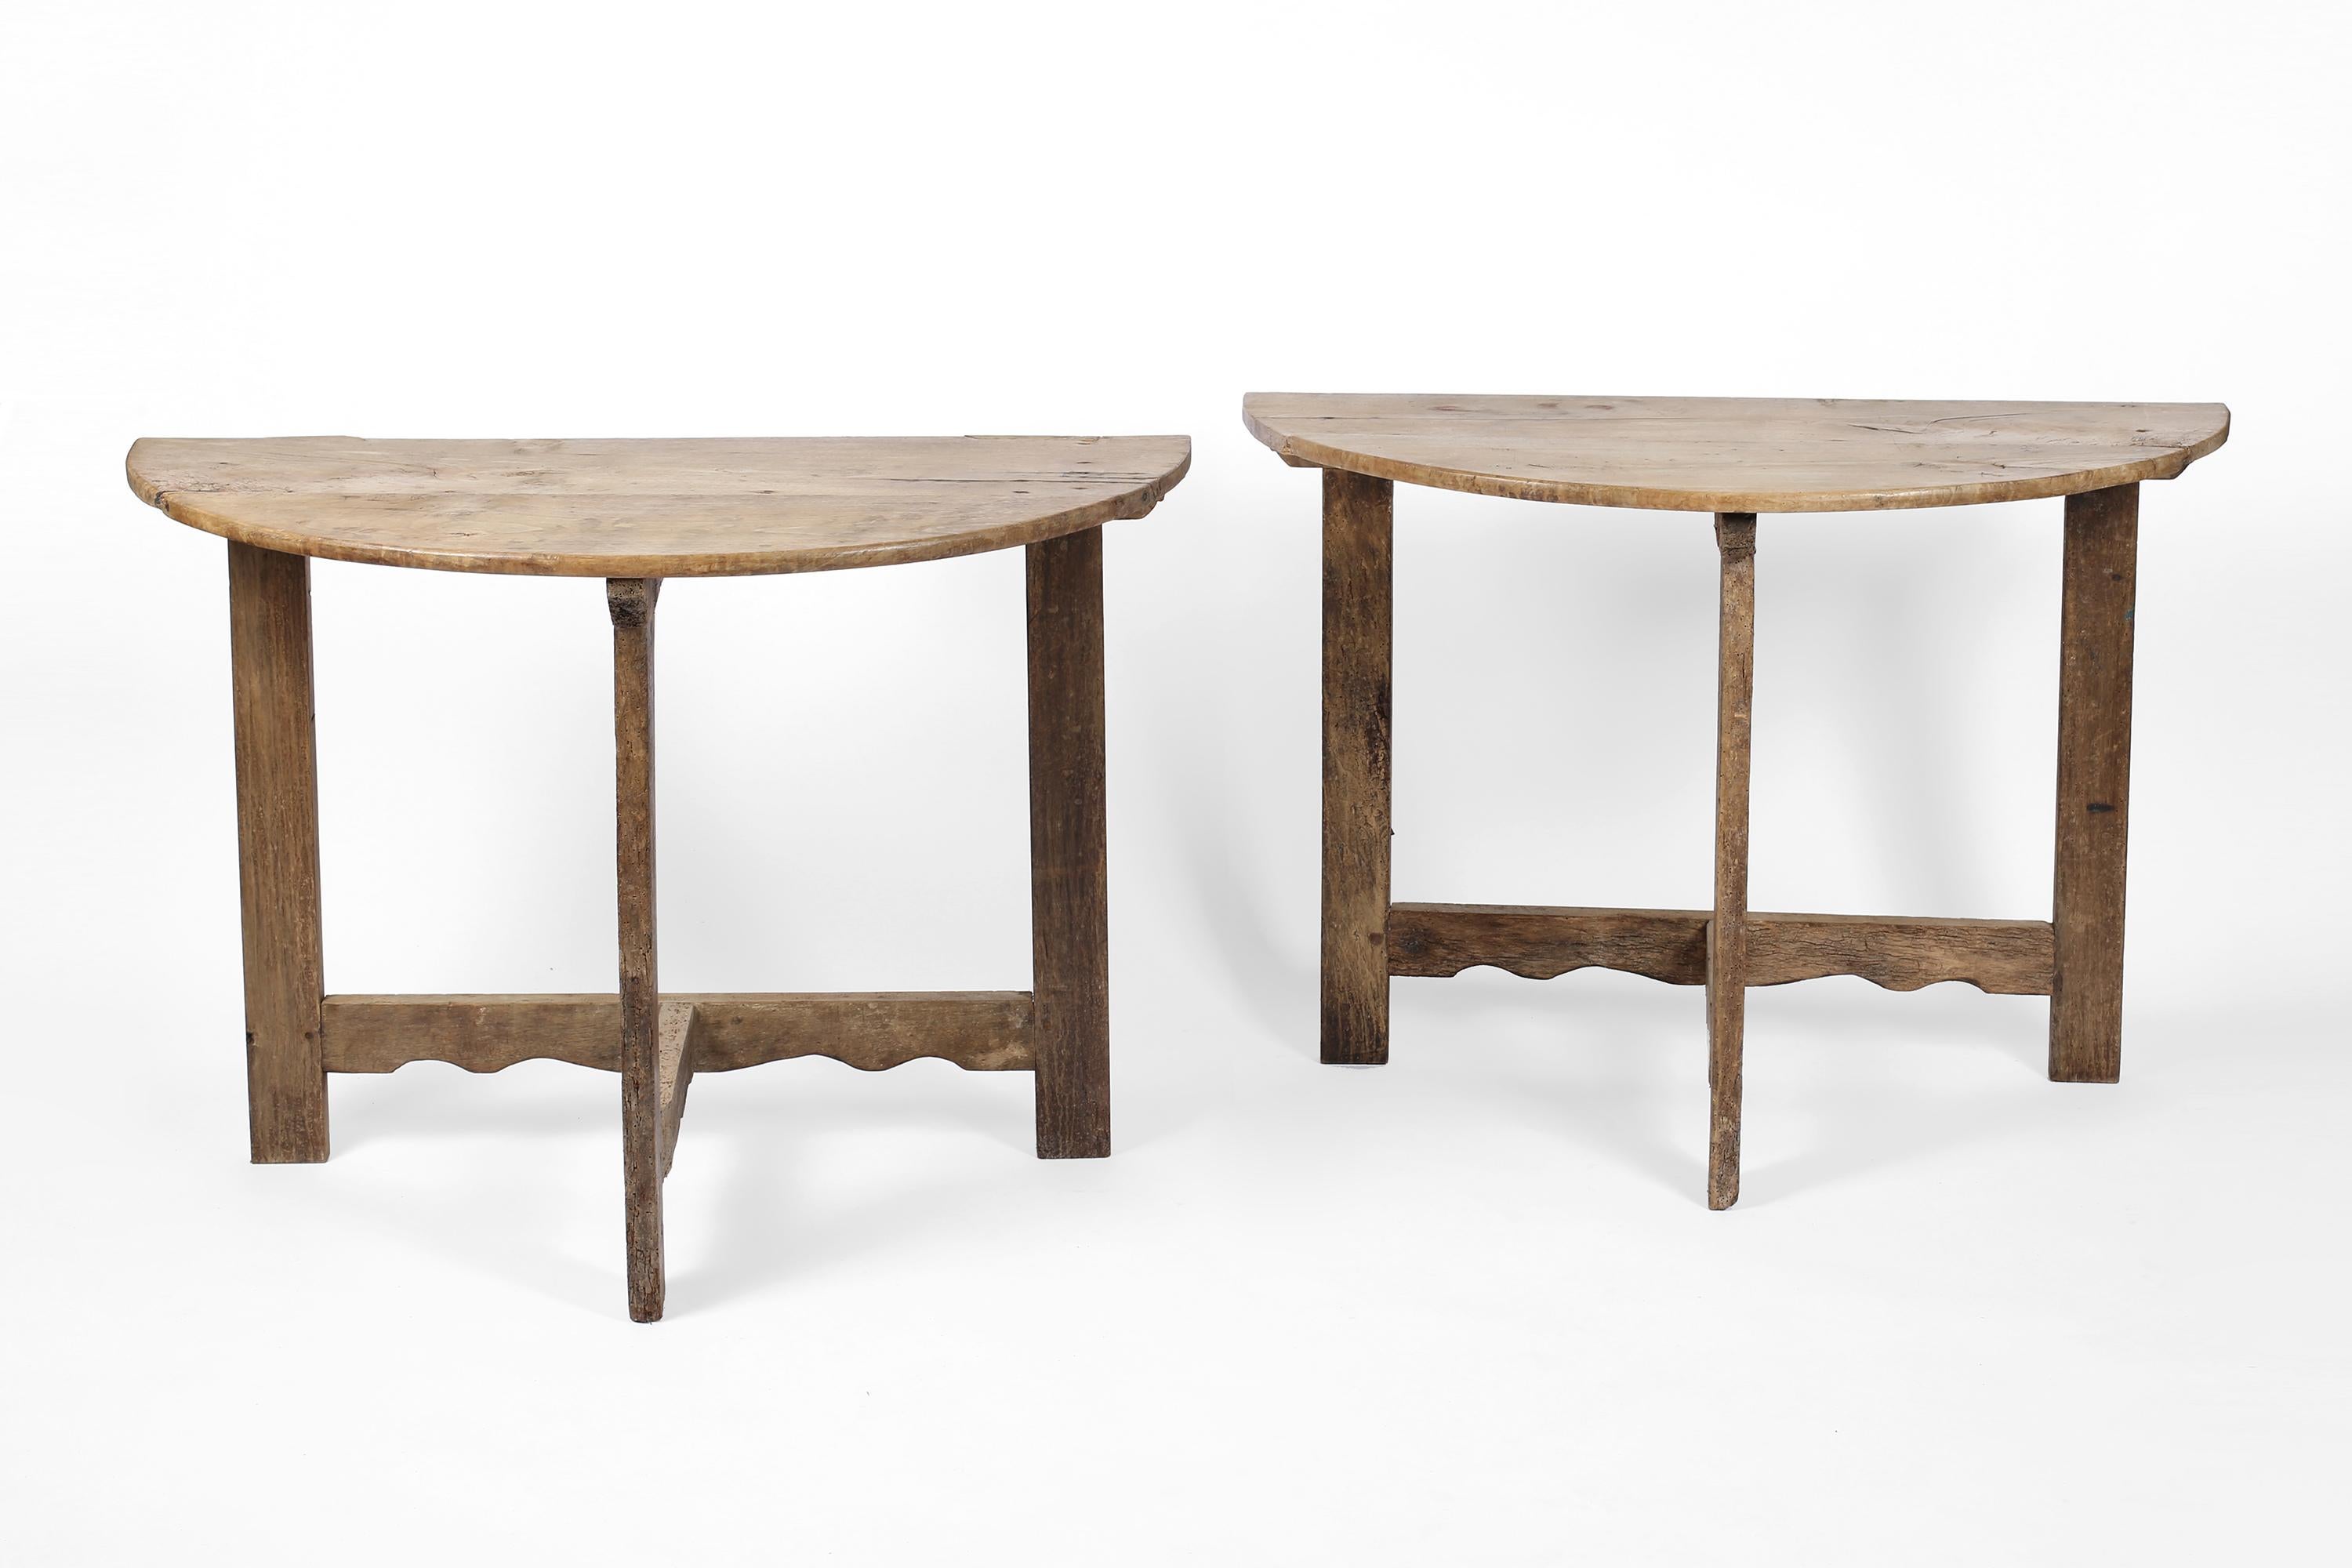 Sold separately. 

A pair of characterful late 18th/early 19th century demi-lune console tables with bleached walnut tops and serpentine detailing to their stretchers. Likely once a single table, the pair can be arranged to create a circular centre